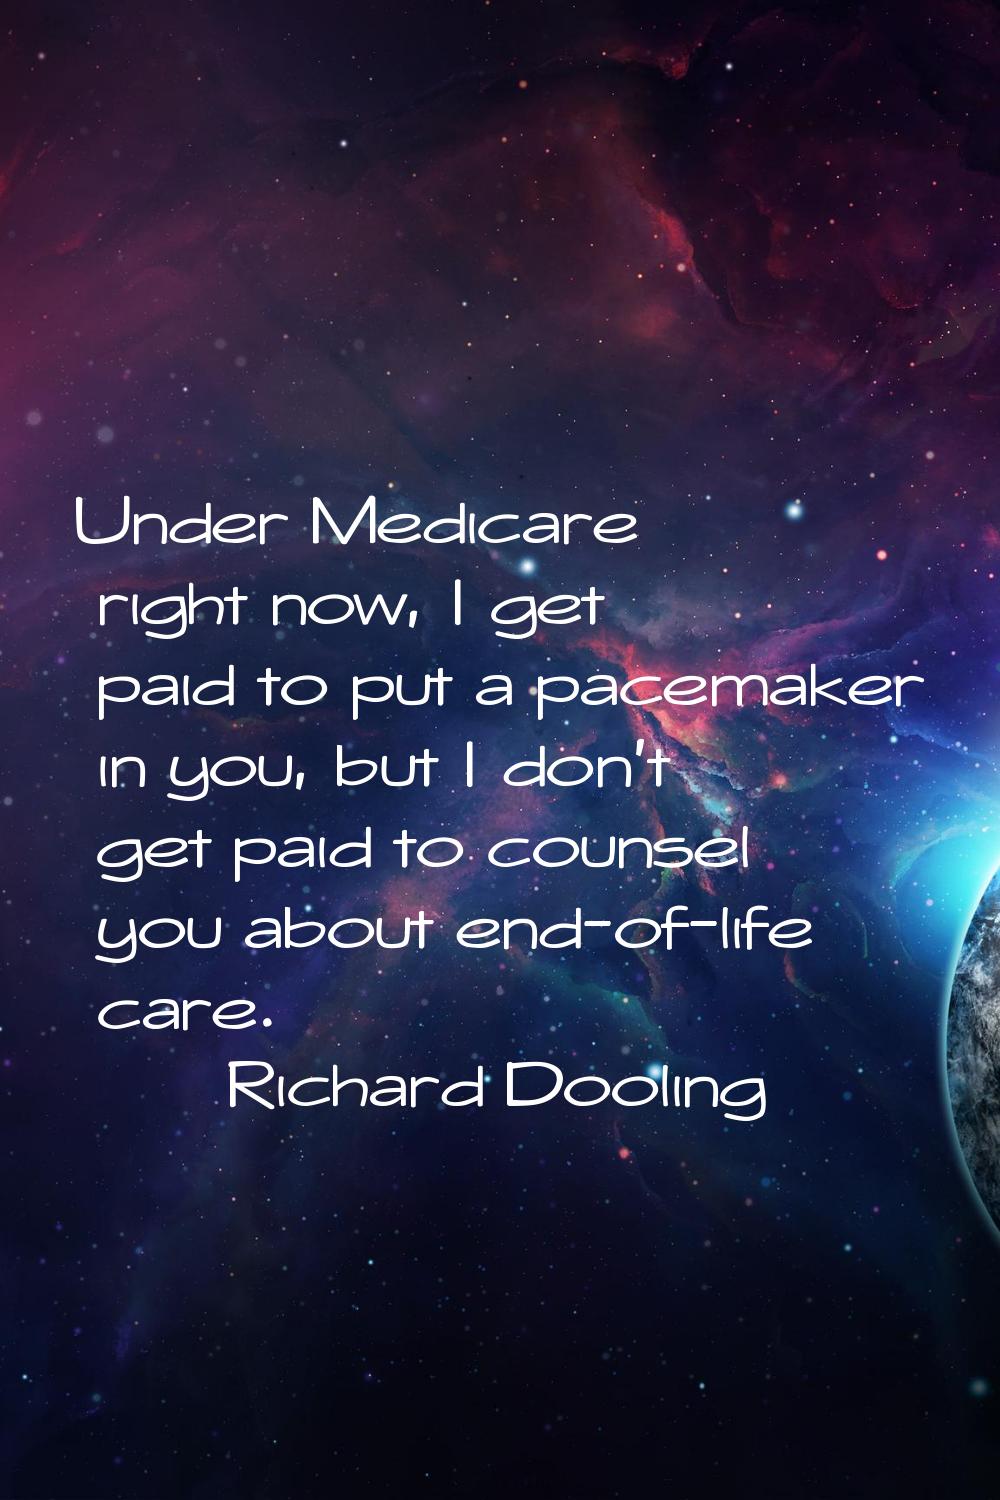 Under Medicare right now, I get paid to put a pacemaker in you, but I don't get paid to counsel you